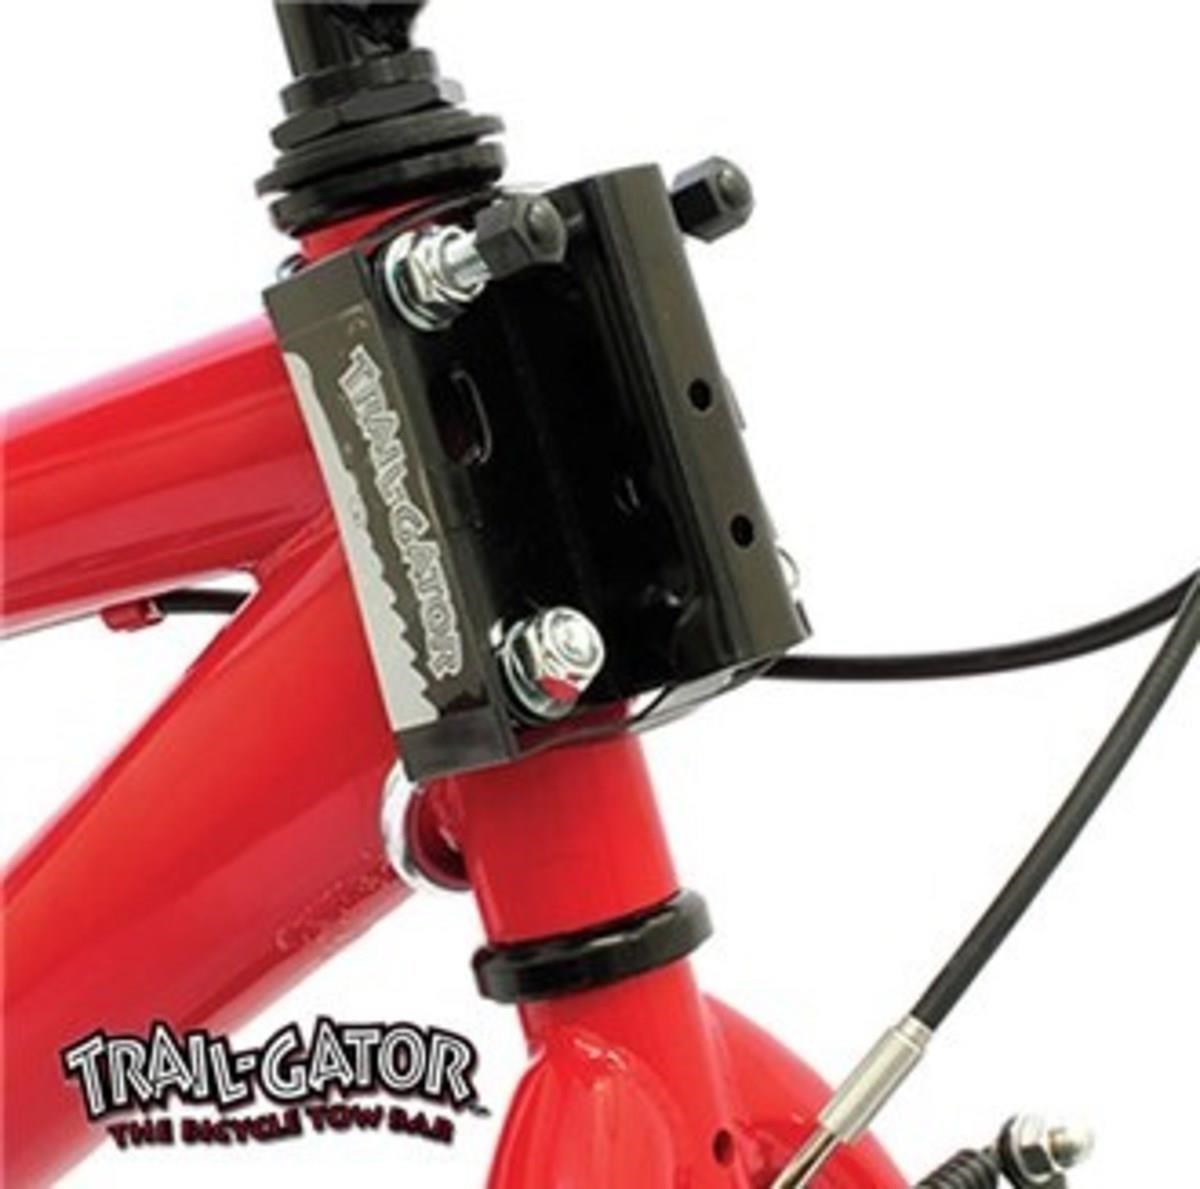 Trail-Gator Receiver Kit product image